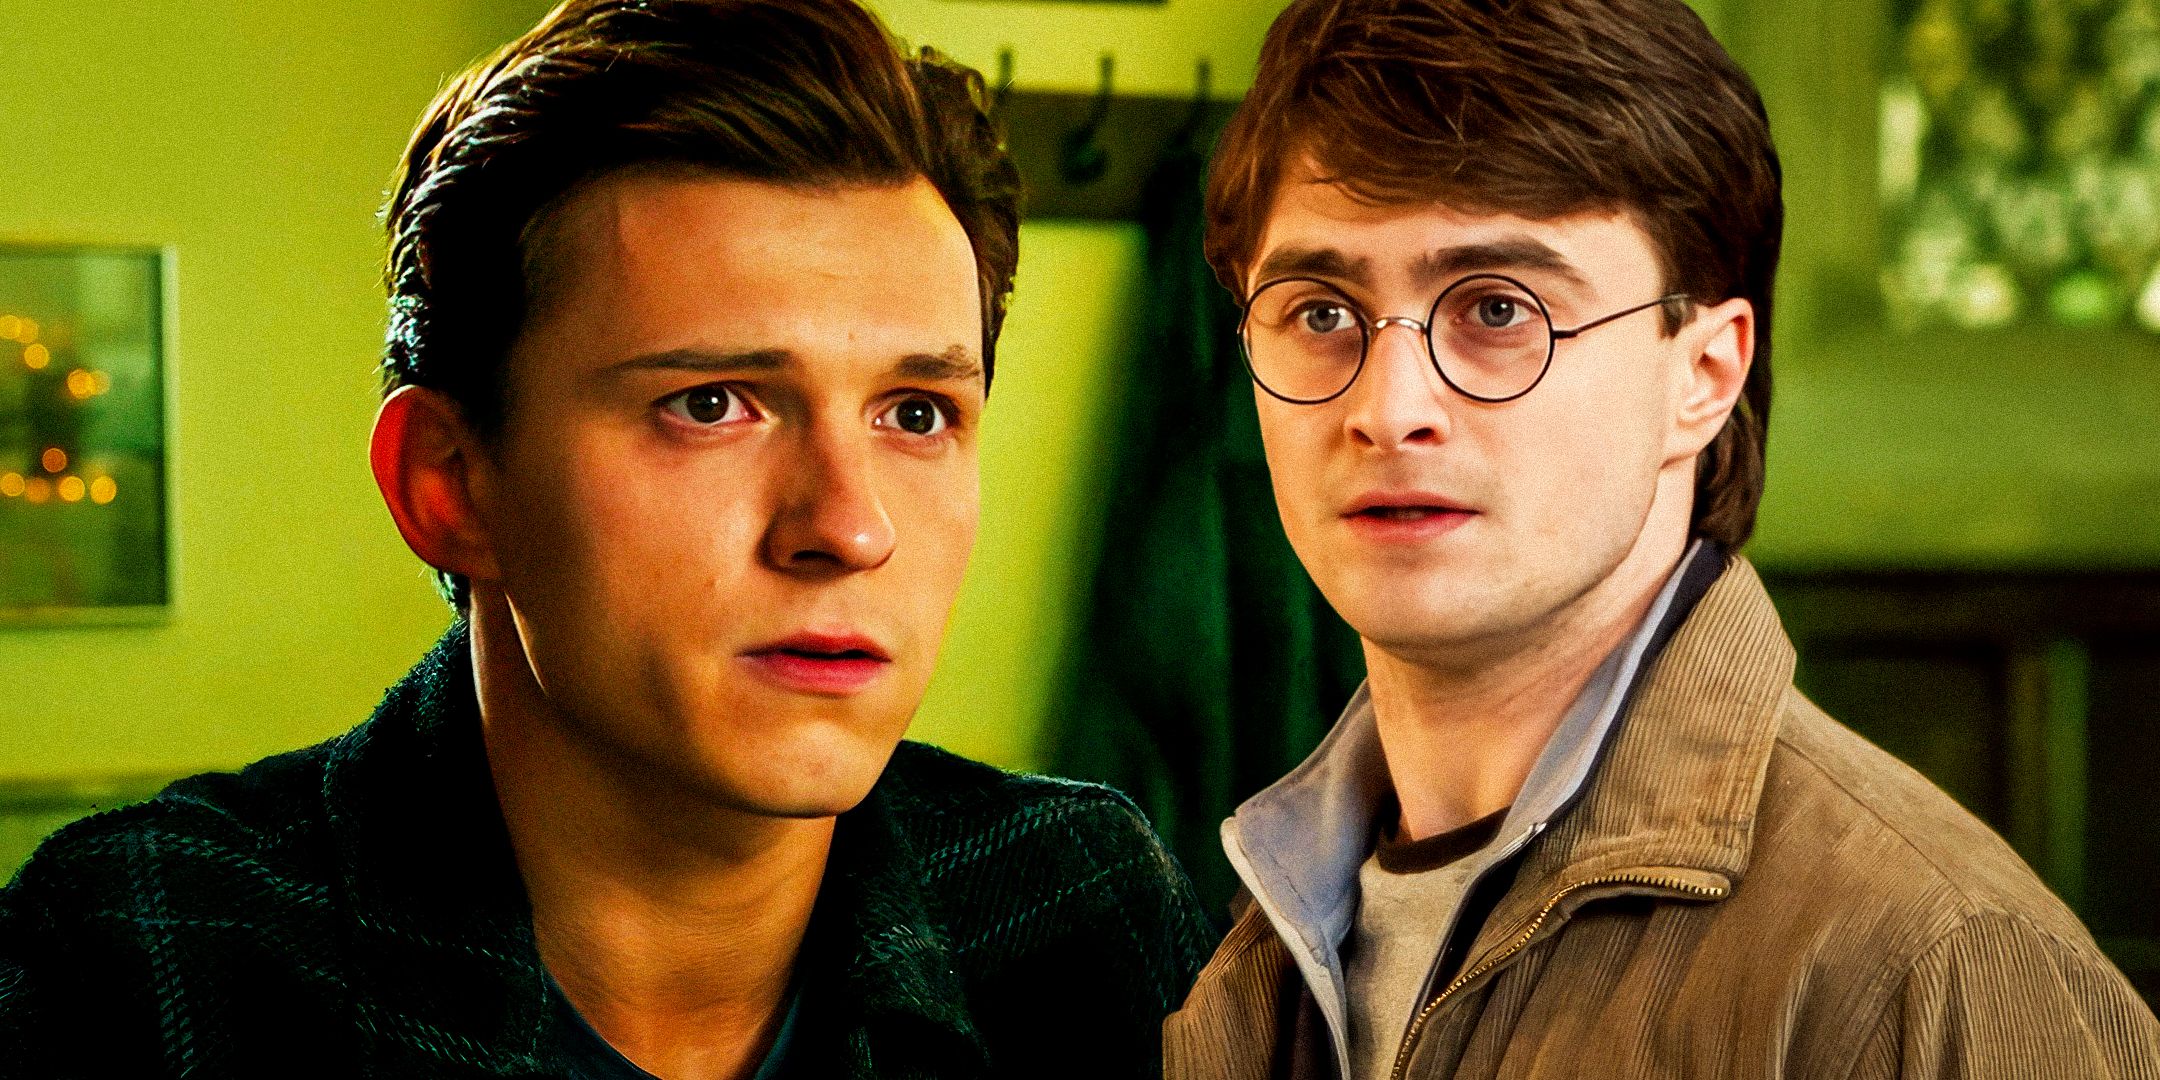 Tom-Holland-as-Peter-Parker--Spider-Man-from-Spider-Man-No-Way-Home-and-Daniel-Radcliffe-as-Harry-Potter-from-Harry-Potter-and-the-Deathly-Hallows-Part-2--1